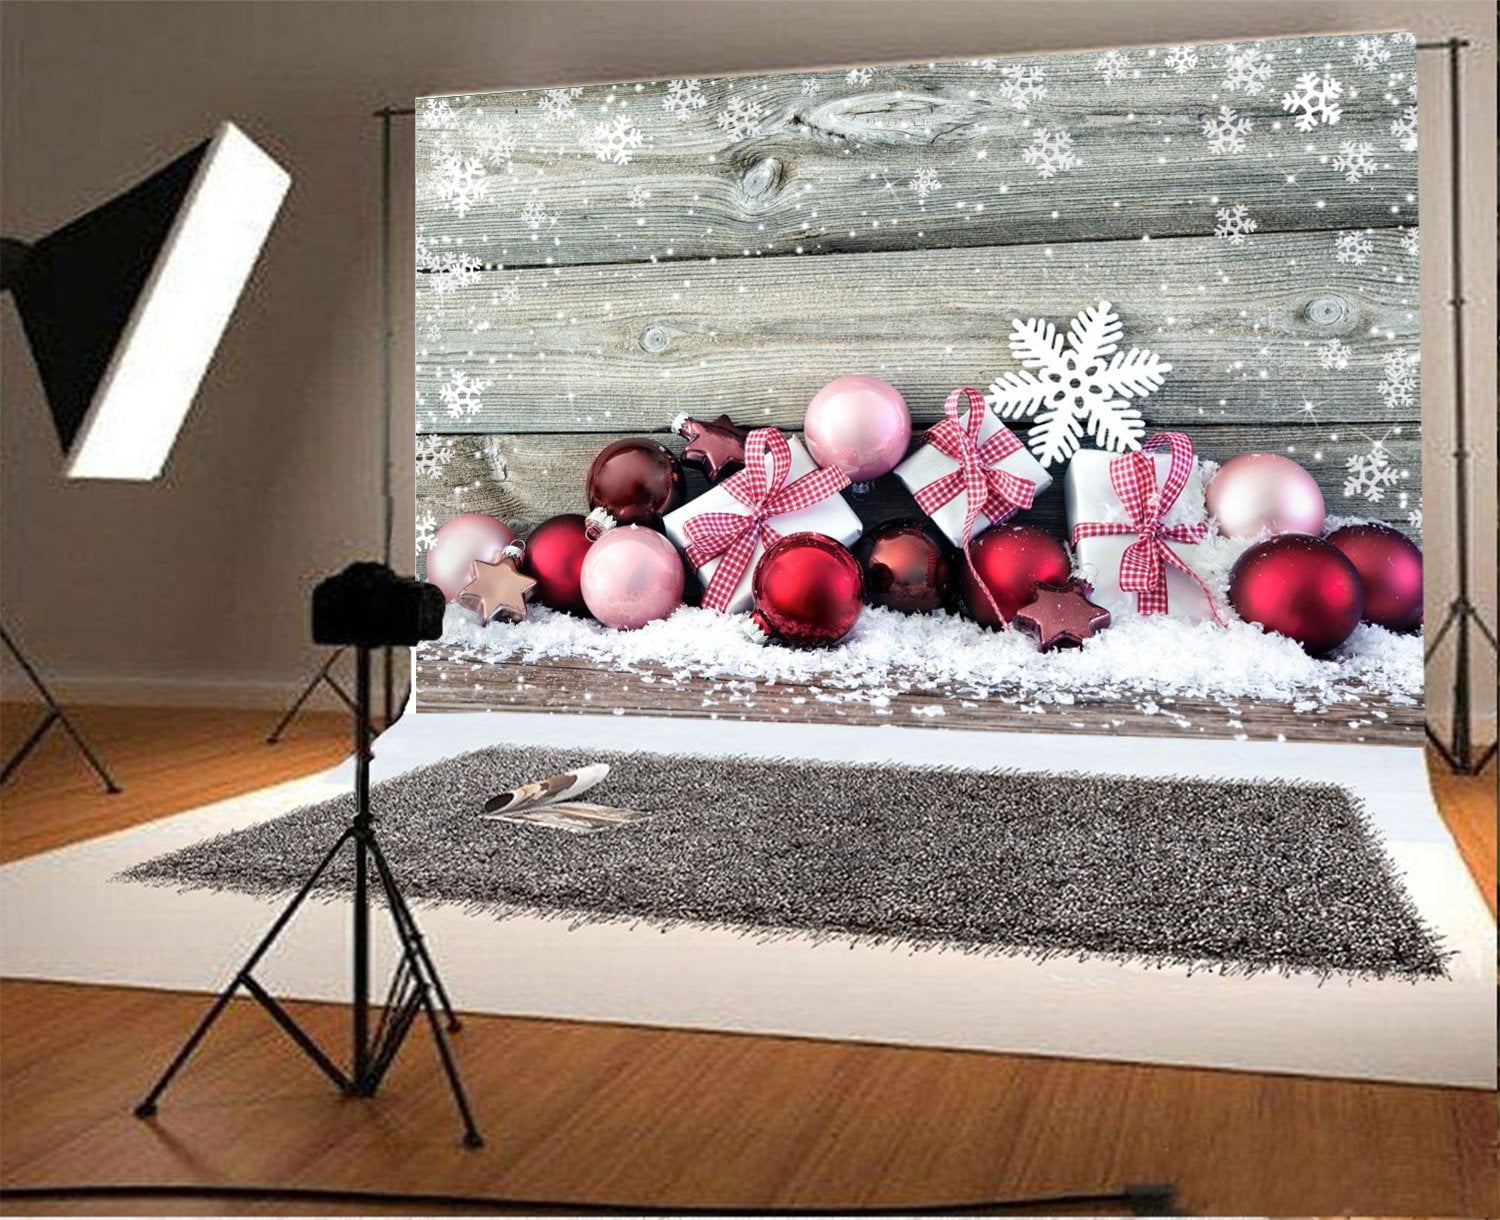 Funnytree 7X5ft Christmas Modern Kitchen Photography Backdrop Retro Wood Wall Cook Background Indoor Photobooth Decorations Photo Studio Newborn Baby Portrait Props 